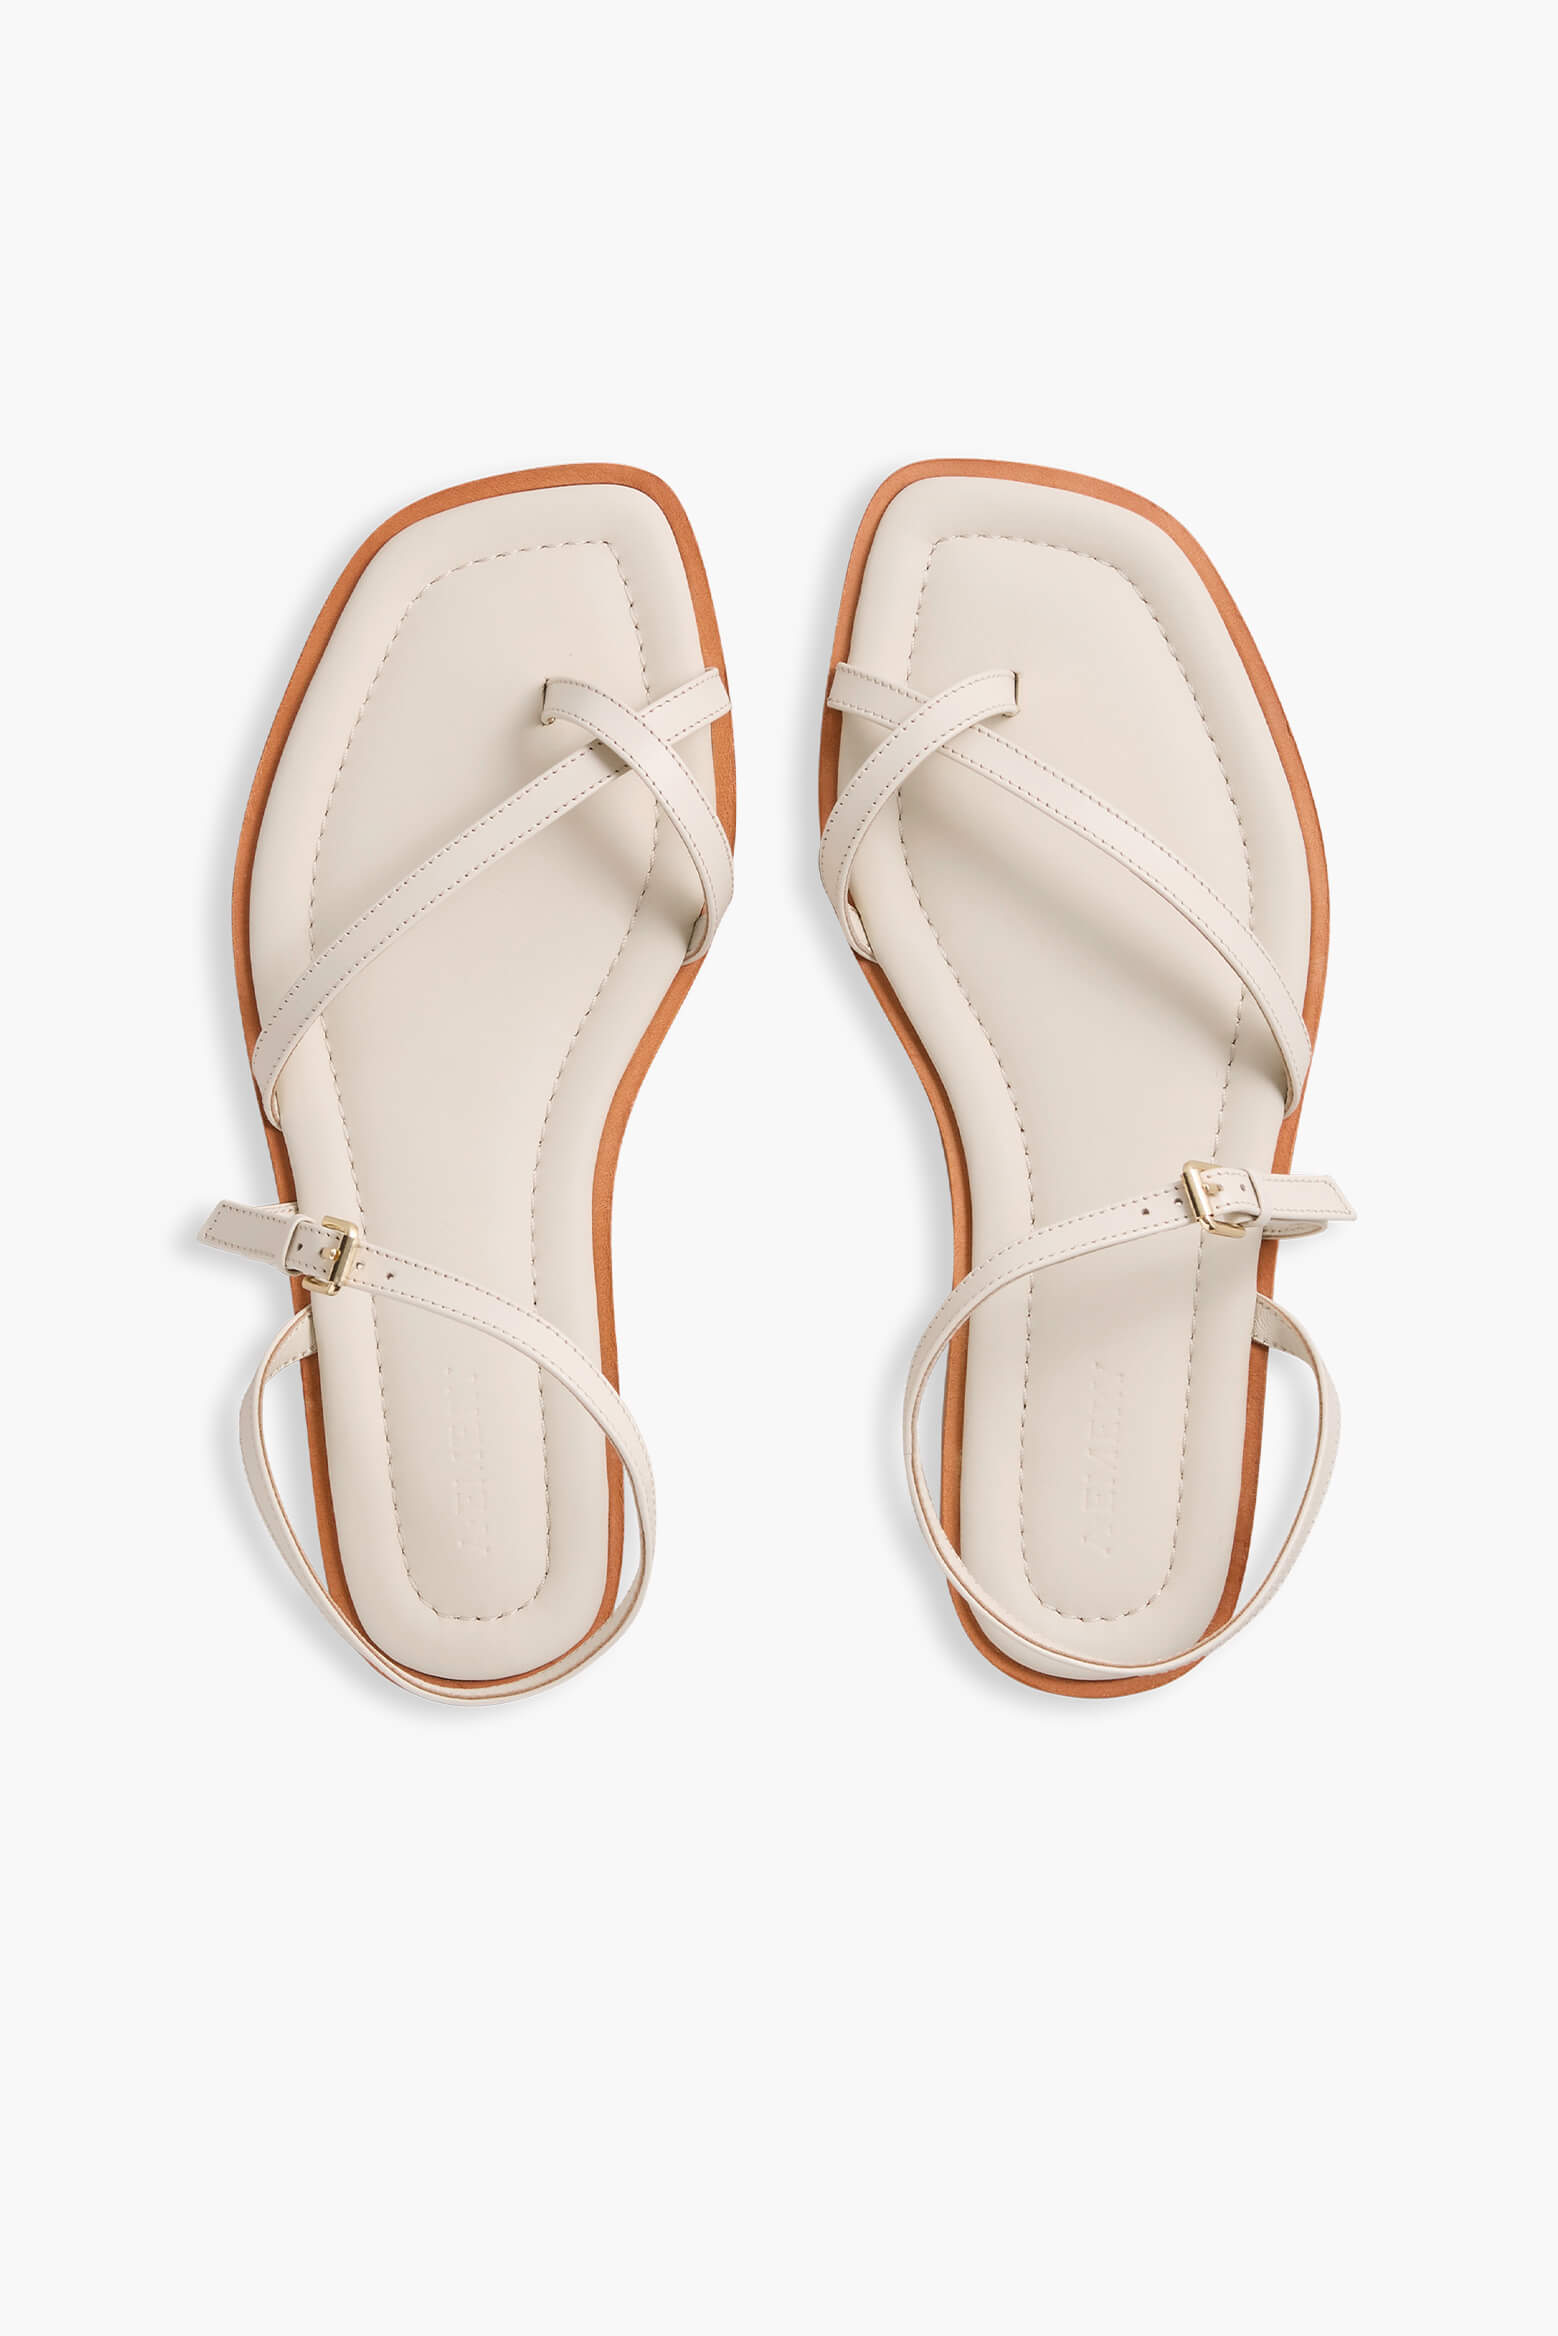 A.Emery Lucia Sandal in Eggshell available at The New Trend Australia.